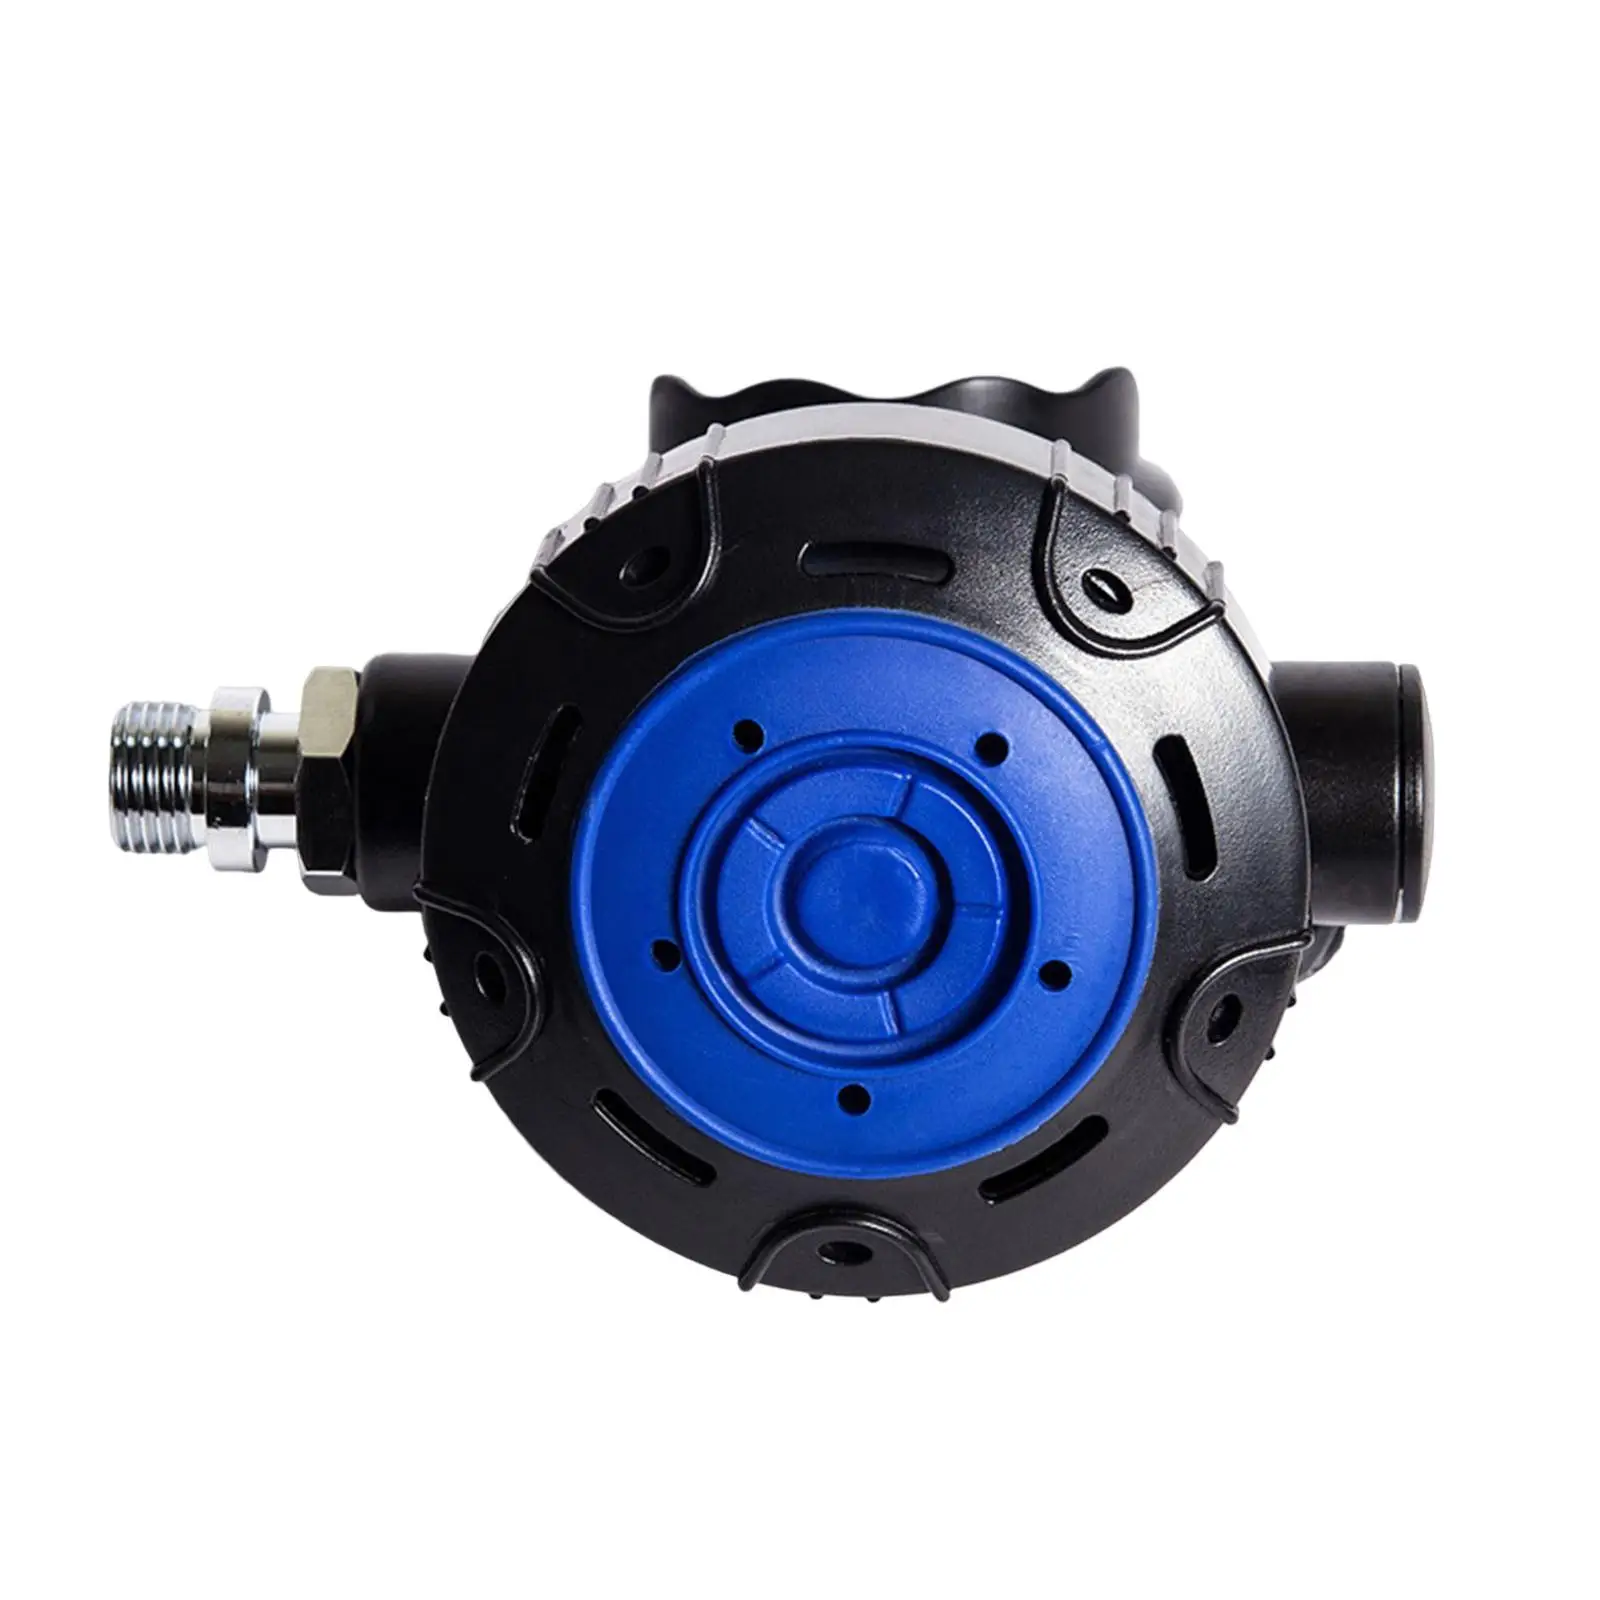 Scuba Diving Regulator Second  Octopus with Mouthpiece Secondary Breathing Valve